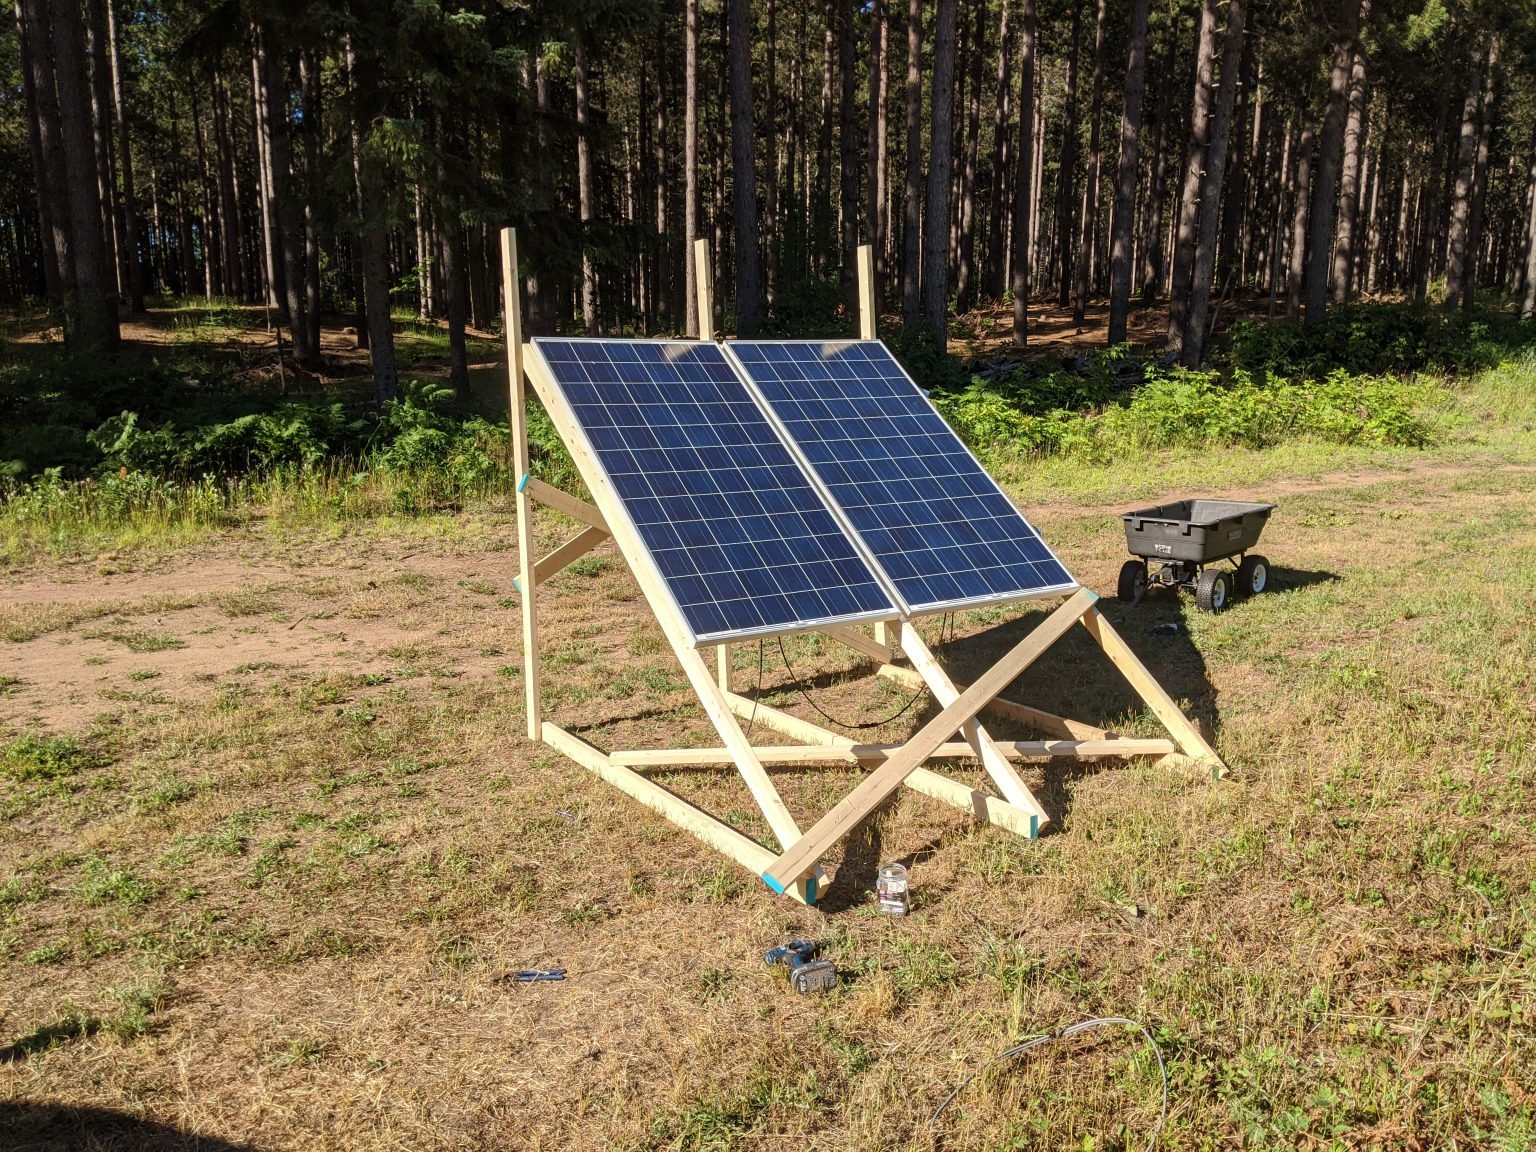 GroundMounted Solar Panels Are a Powerful Inexpensive Way to Double Solar Energy Mortons on